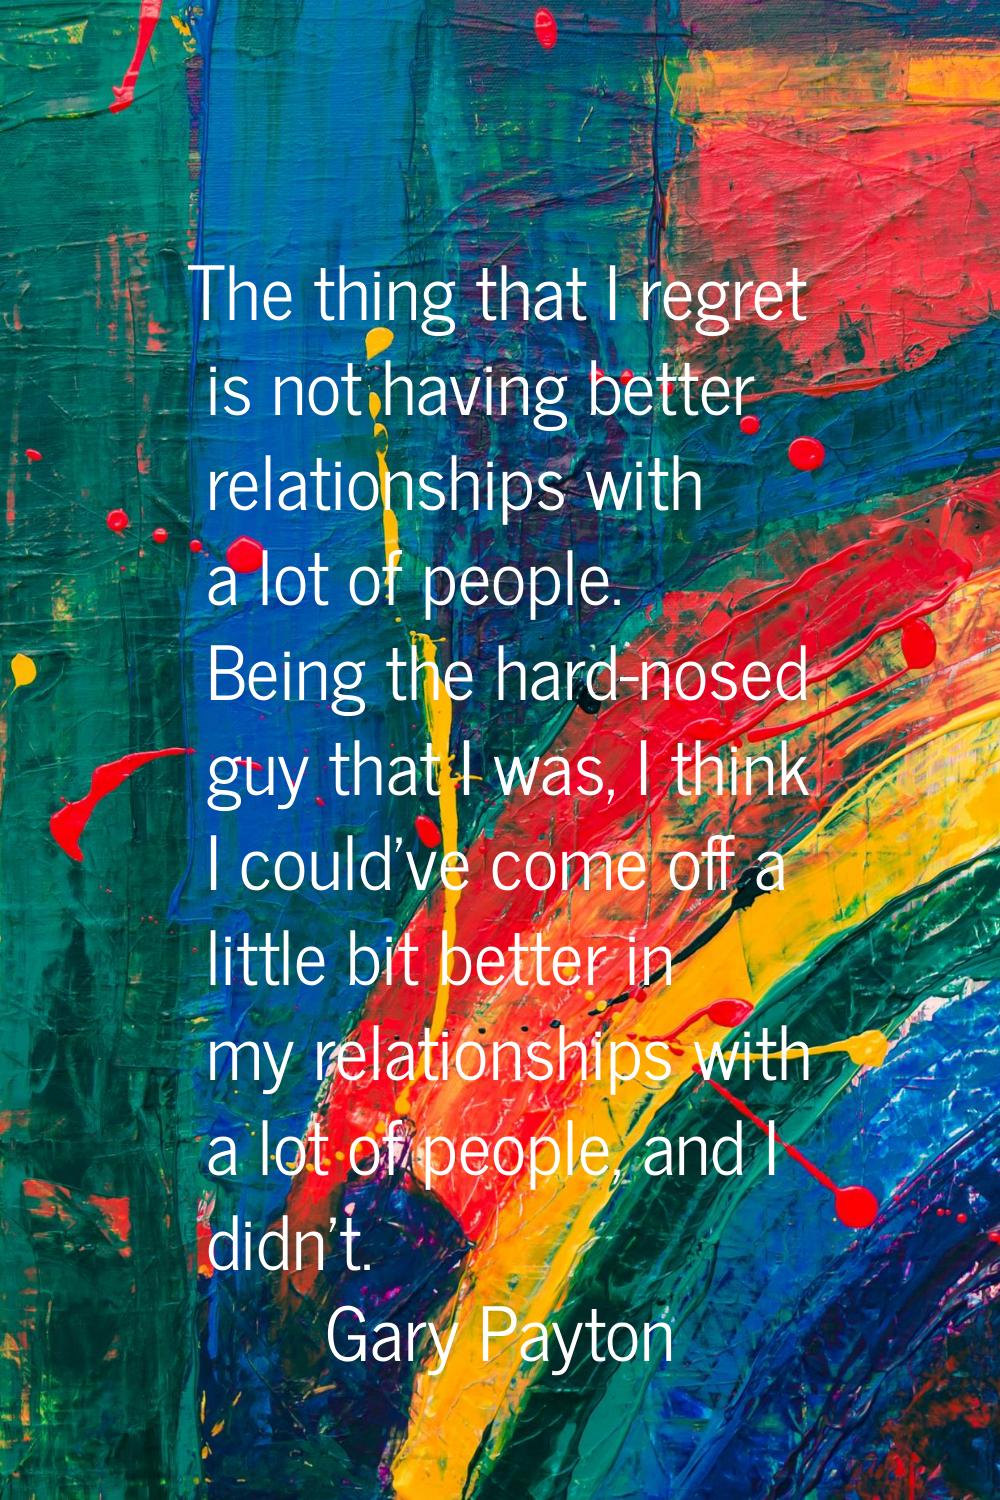 The thing that I regret is not having better relationships with a lot of people. Being the hard-nos